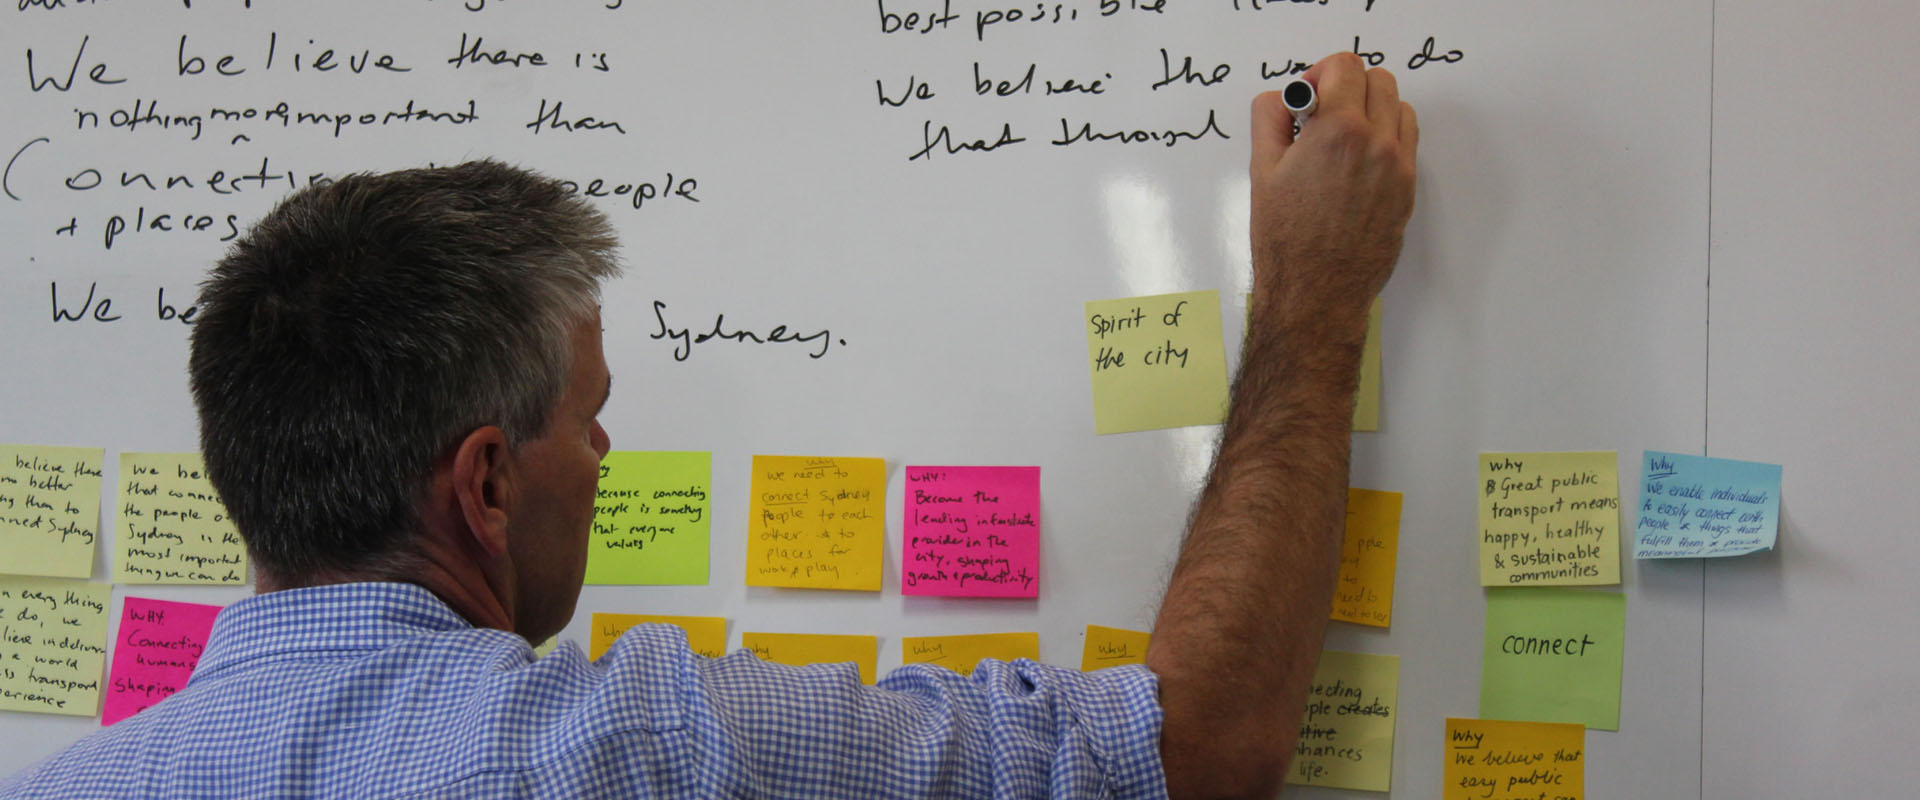 Proto CEO Damian Kernahan writing notes on a customer experice journey design wall